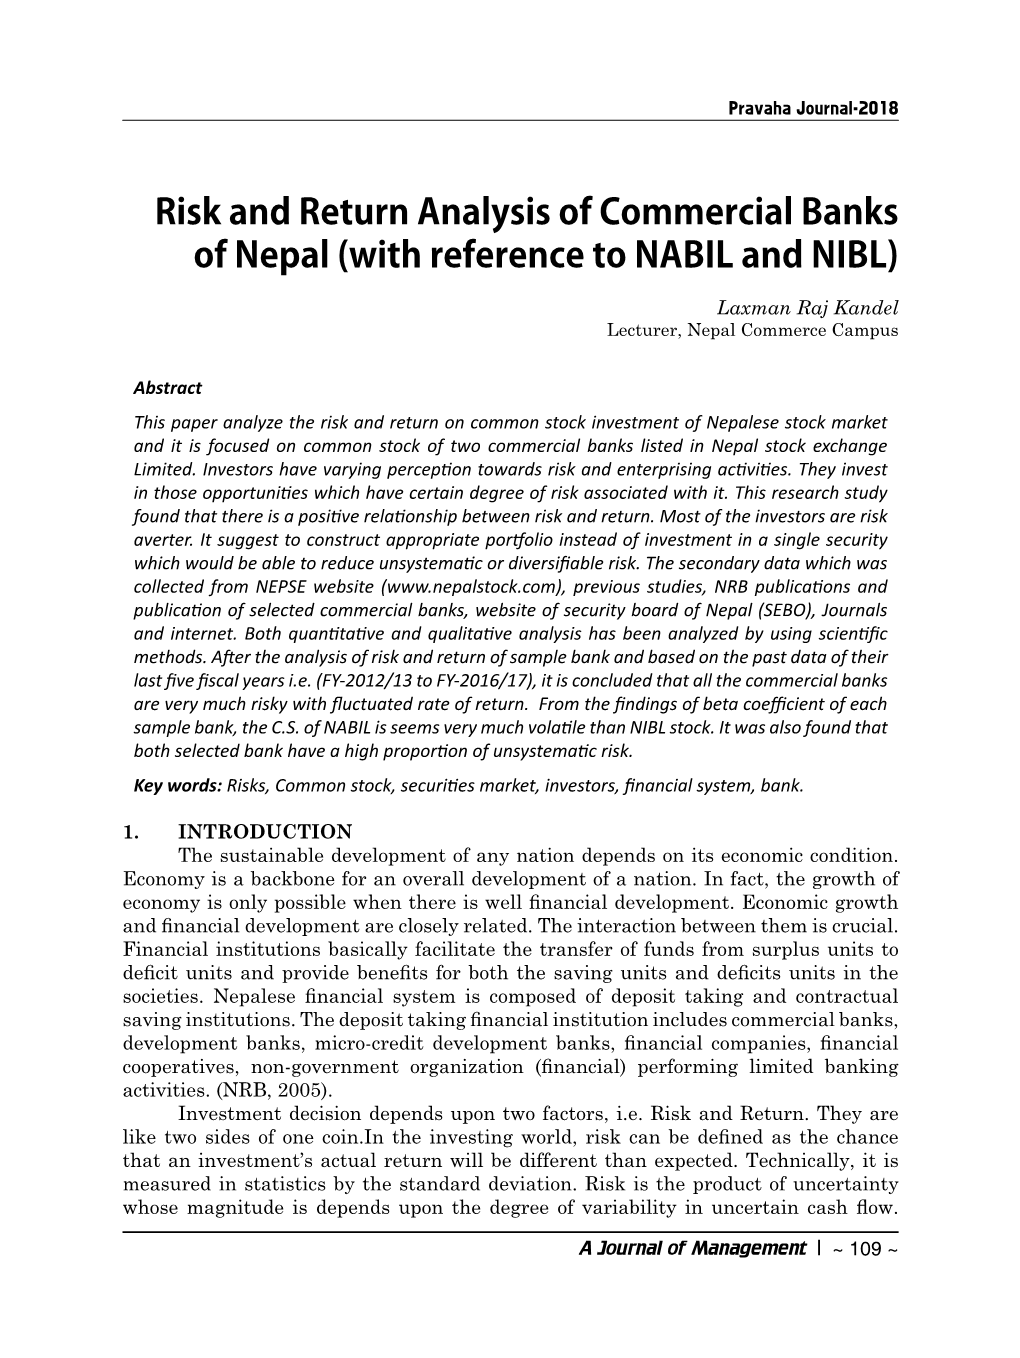 Risk and Return Analysis of Commercial Banks of Nepal (With Reference to NABIL and NIBL) Laxman Raj Kandel Lecturer, Nepal Commerce Campus